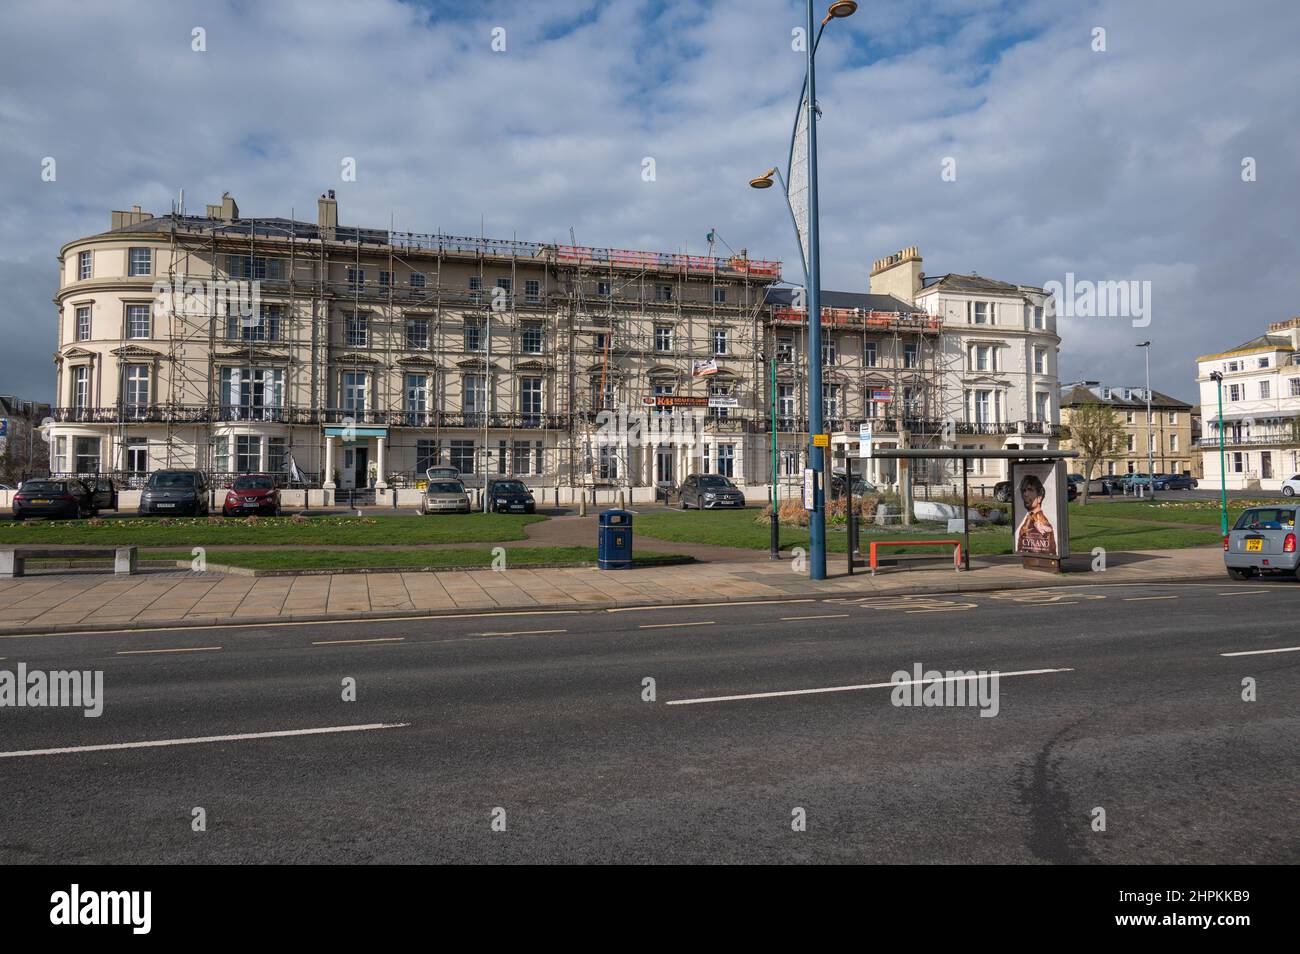 Carlton Hotel great Yarmouth with scaffolding around the building Stock Photo